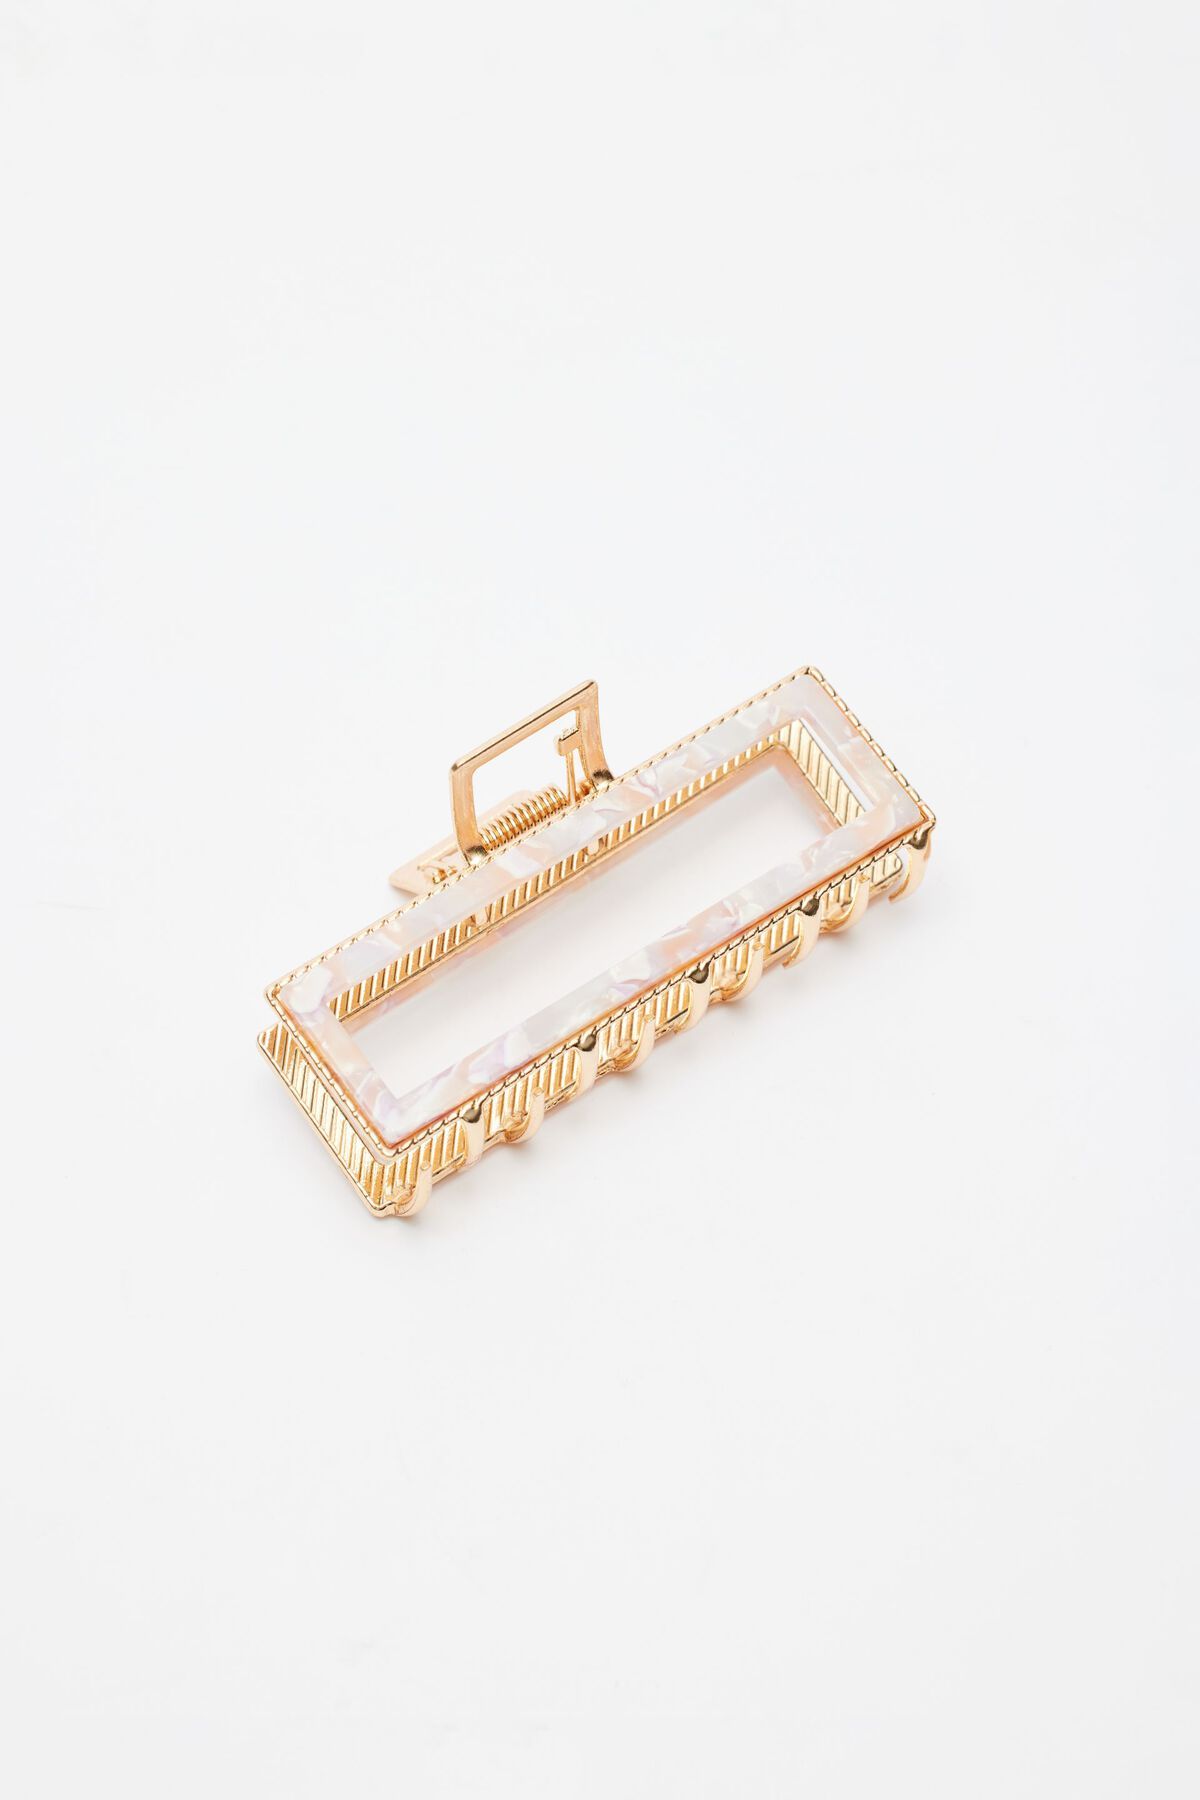 Dynamite Metal Rectangle Claw Hair Clip. 4